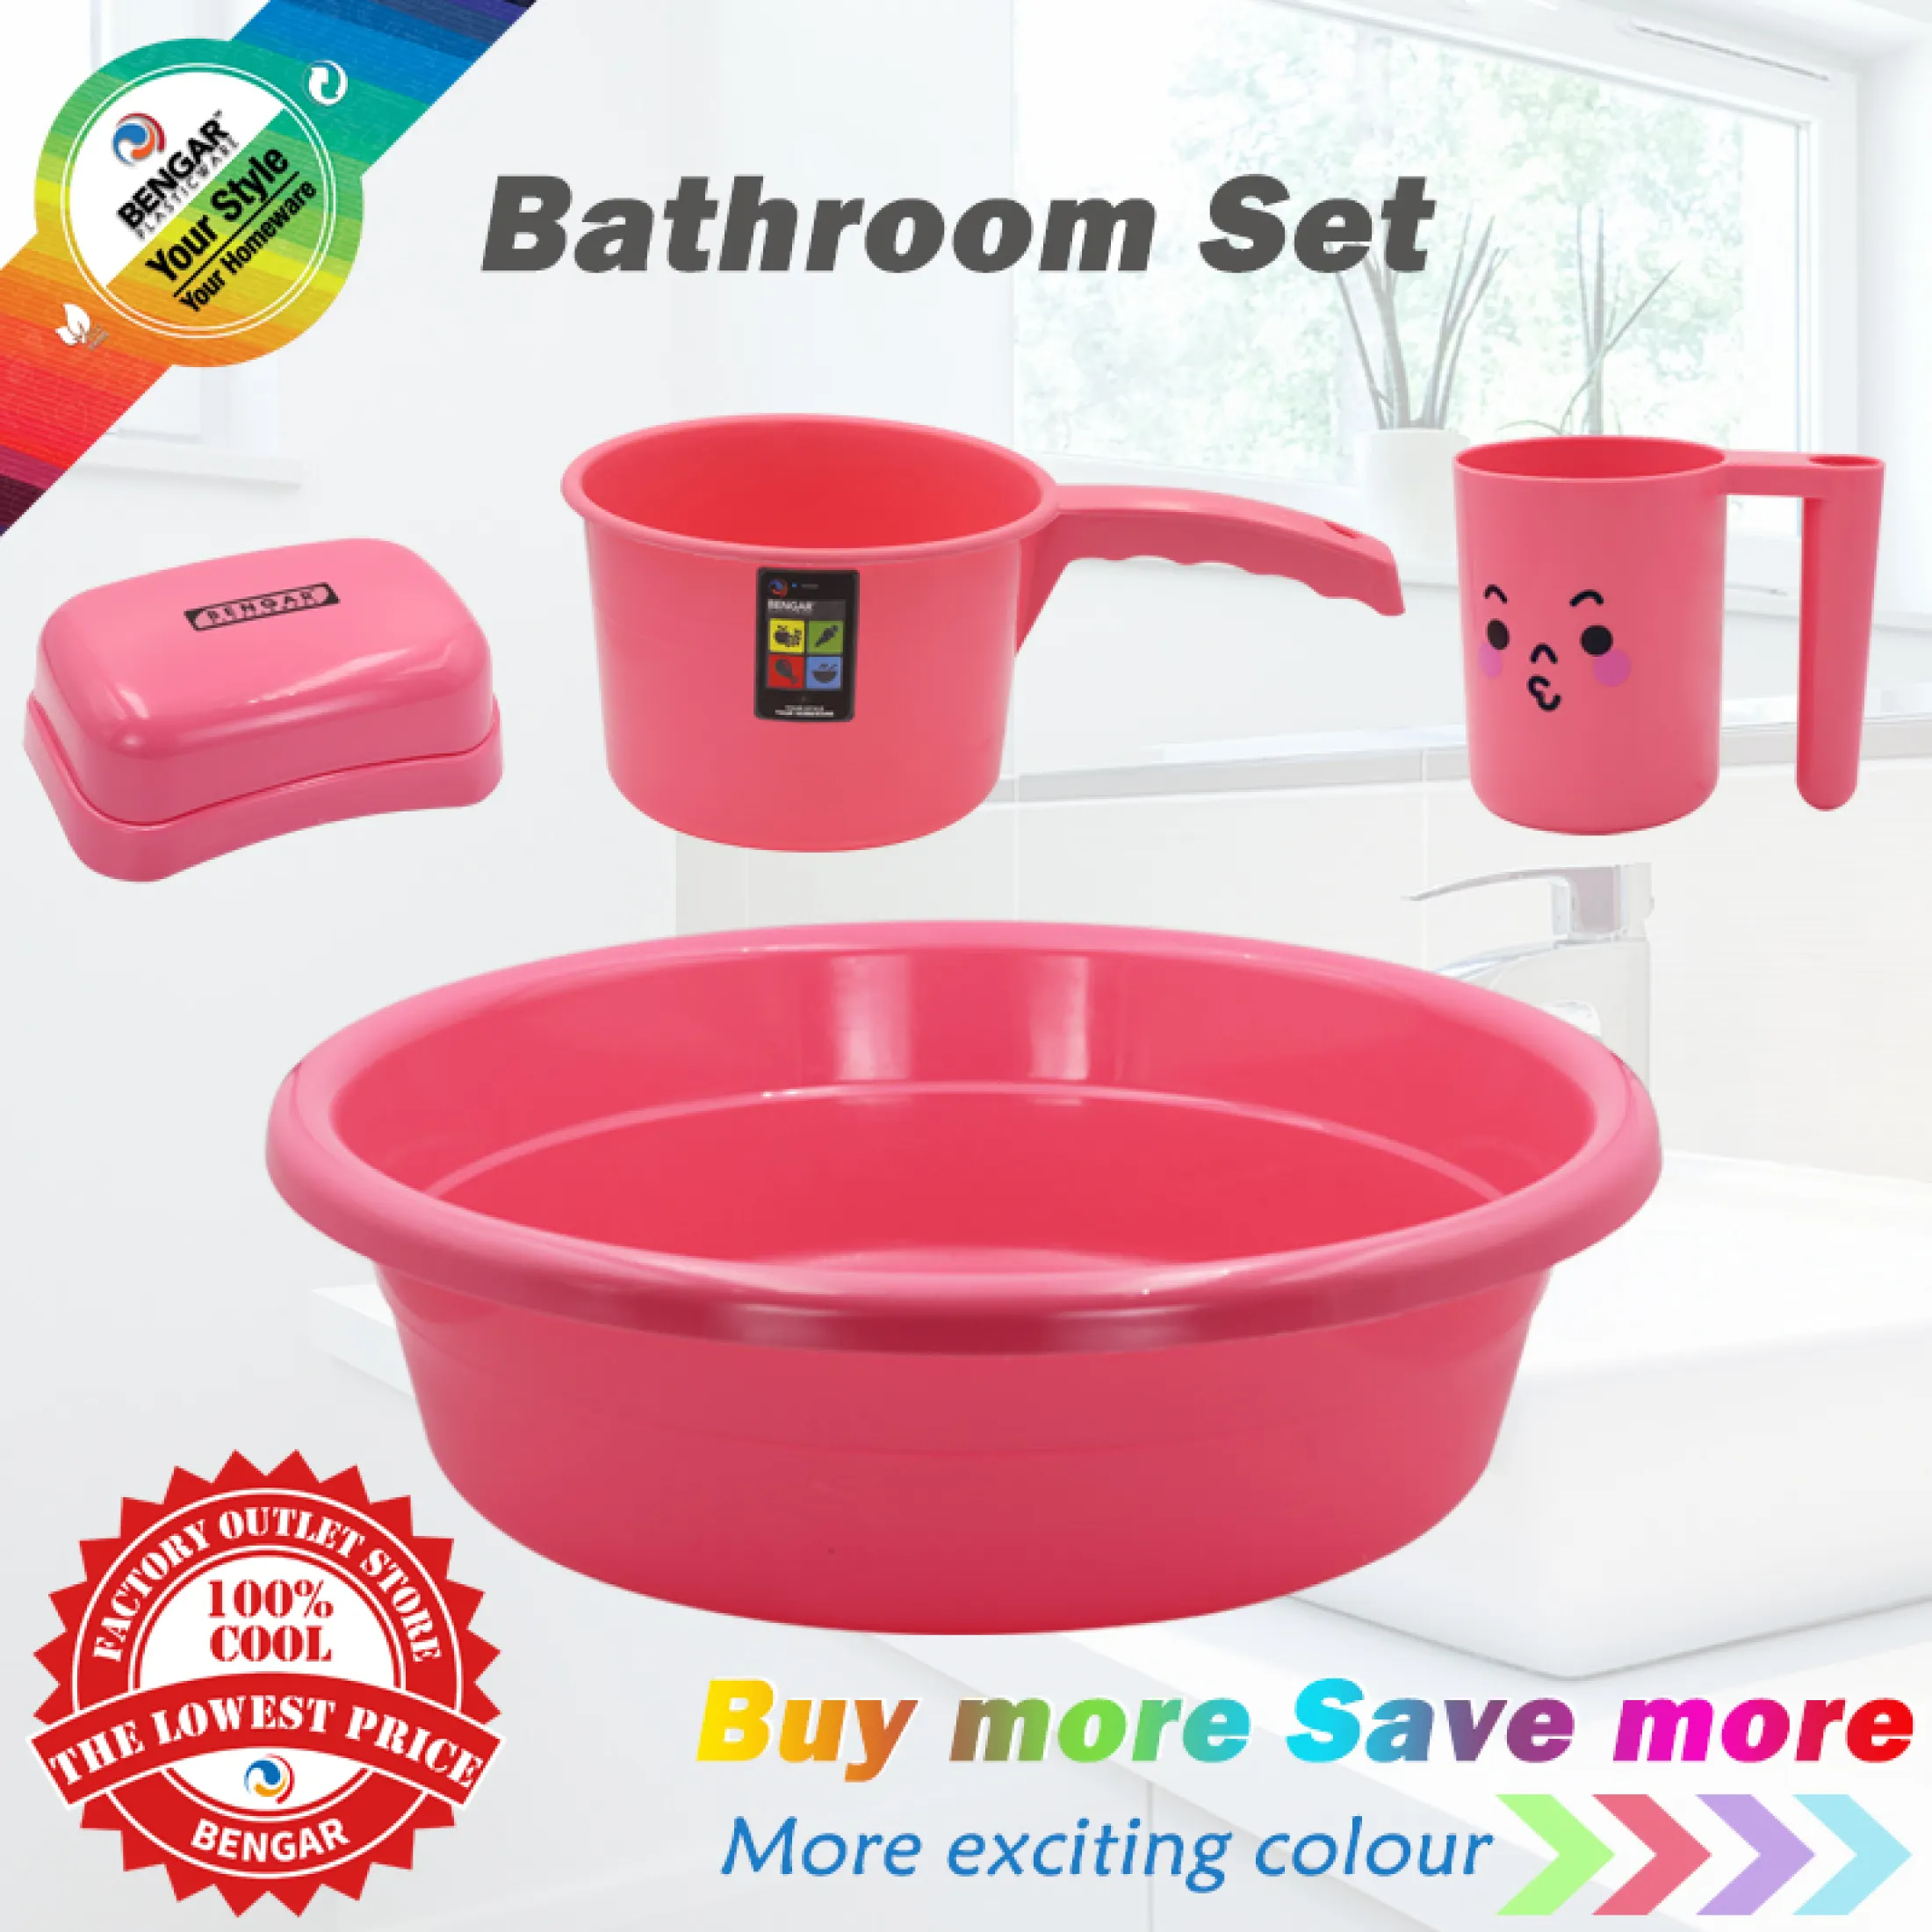 New High Quality Collection Laundry Basin Planggana Set Of Mini Dish Soap With Water Dipper Tabo And Cute Mug With Toothbrush Holder With Emoji Bathroom Use Laundry Use Kitchen